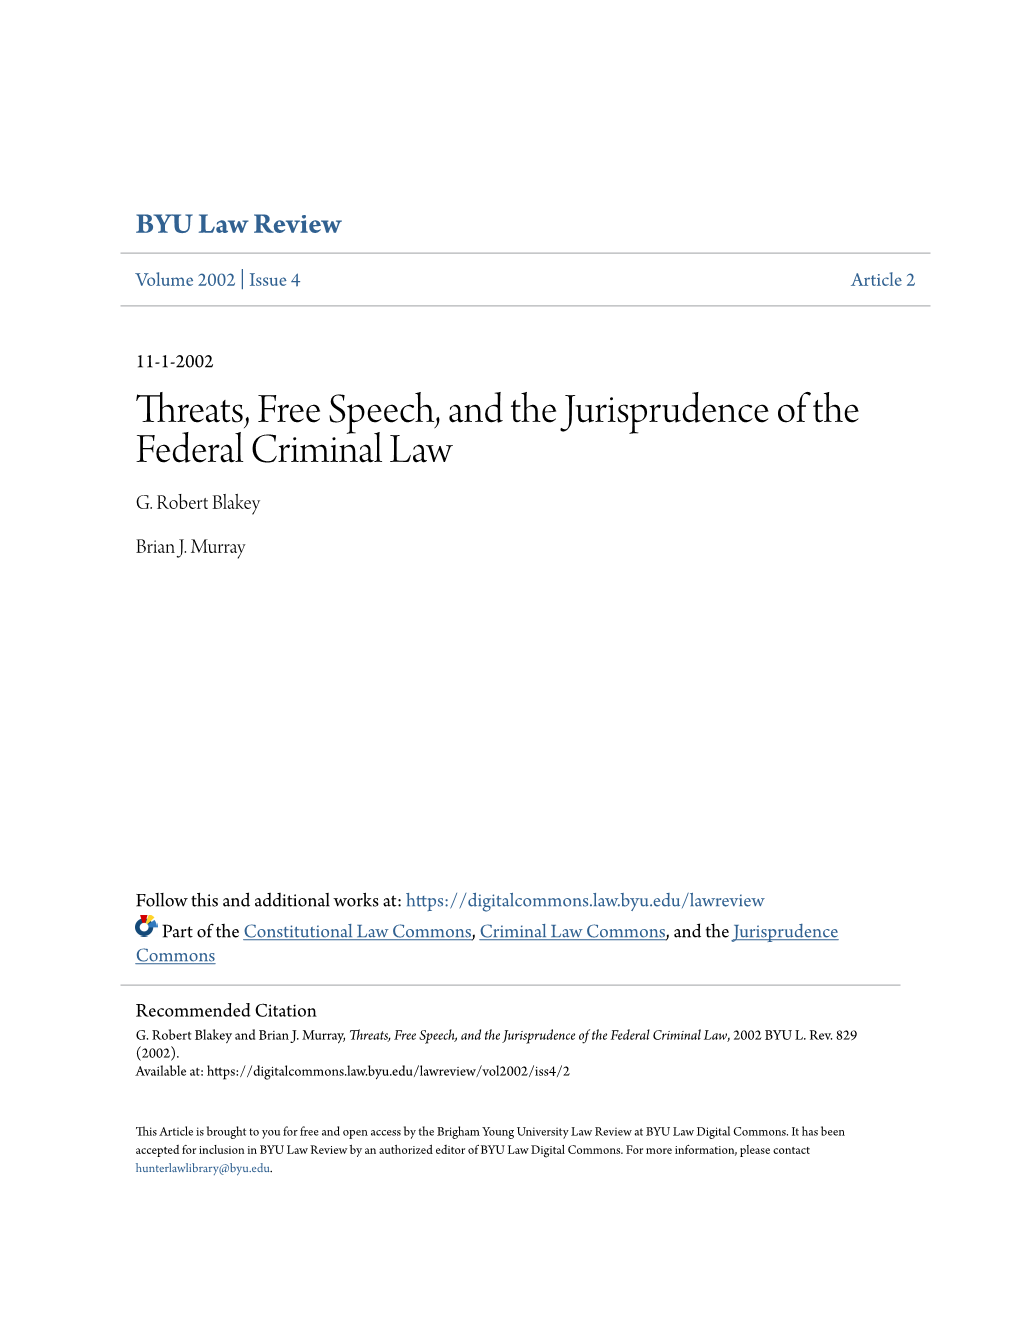 Threats, Free Speech, and the Jurisprudence of the Federal Criminal Law G